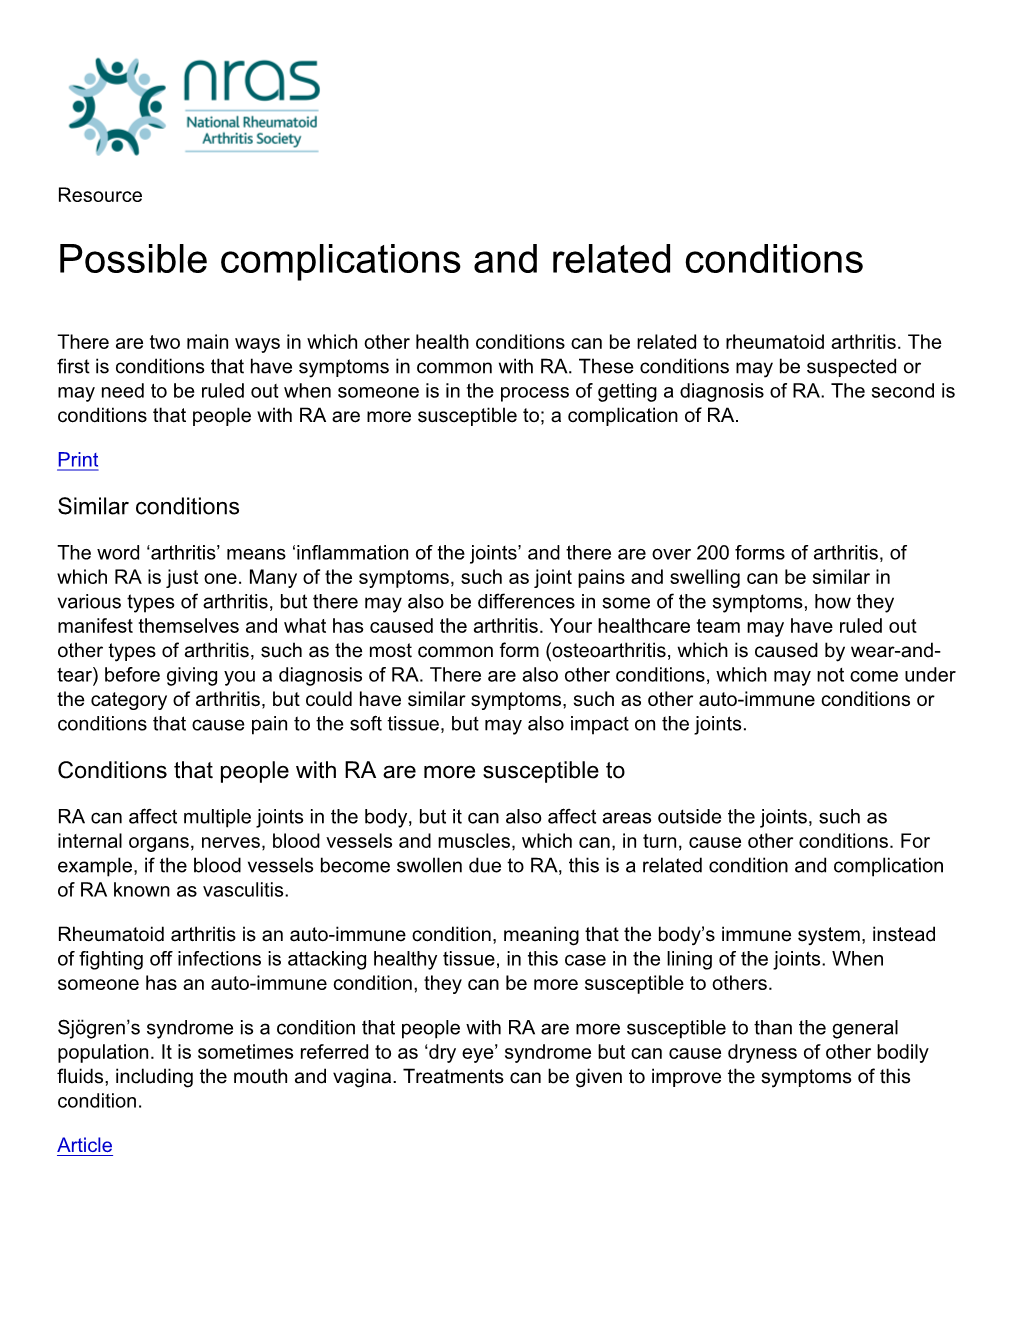 Possible Complications and Related Conditions